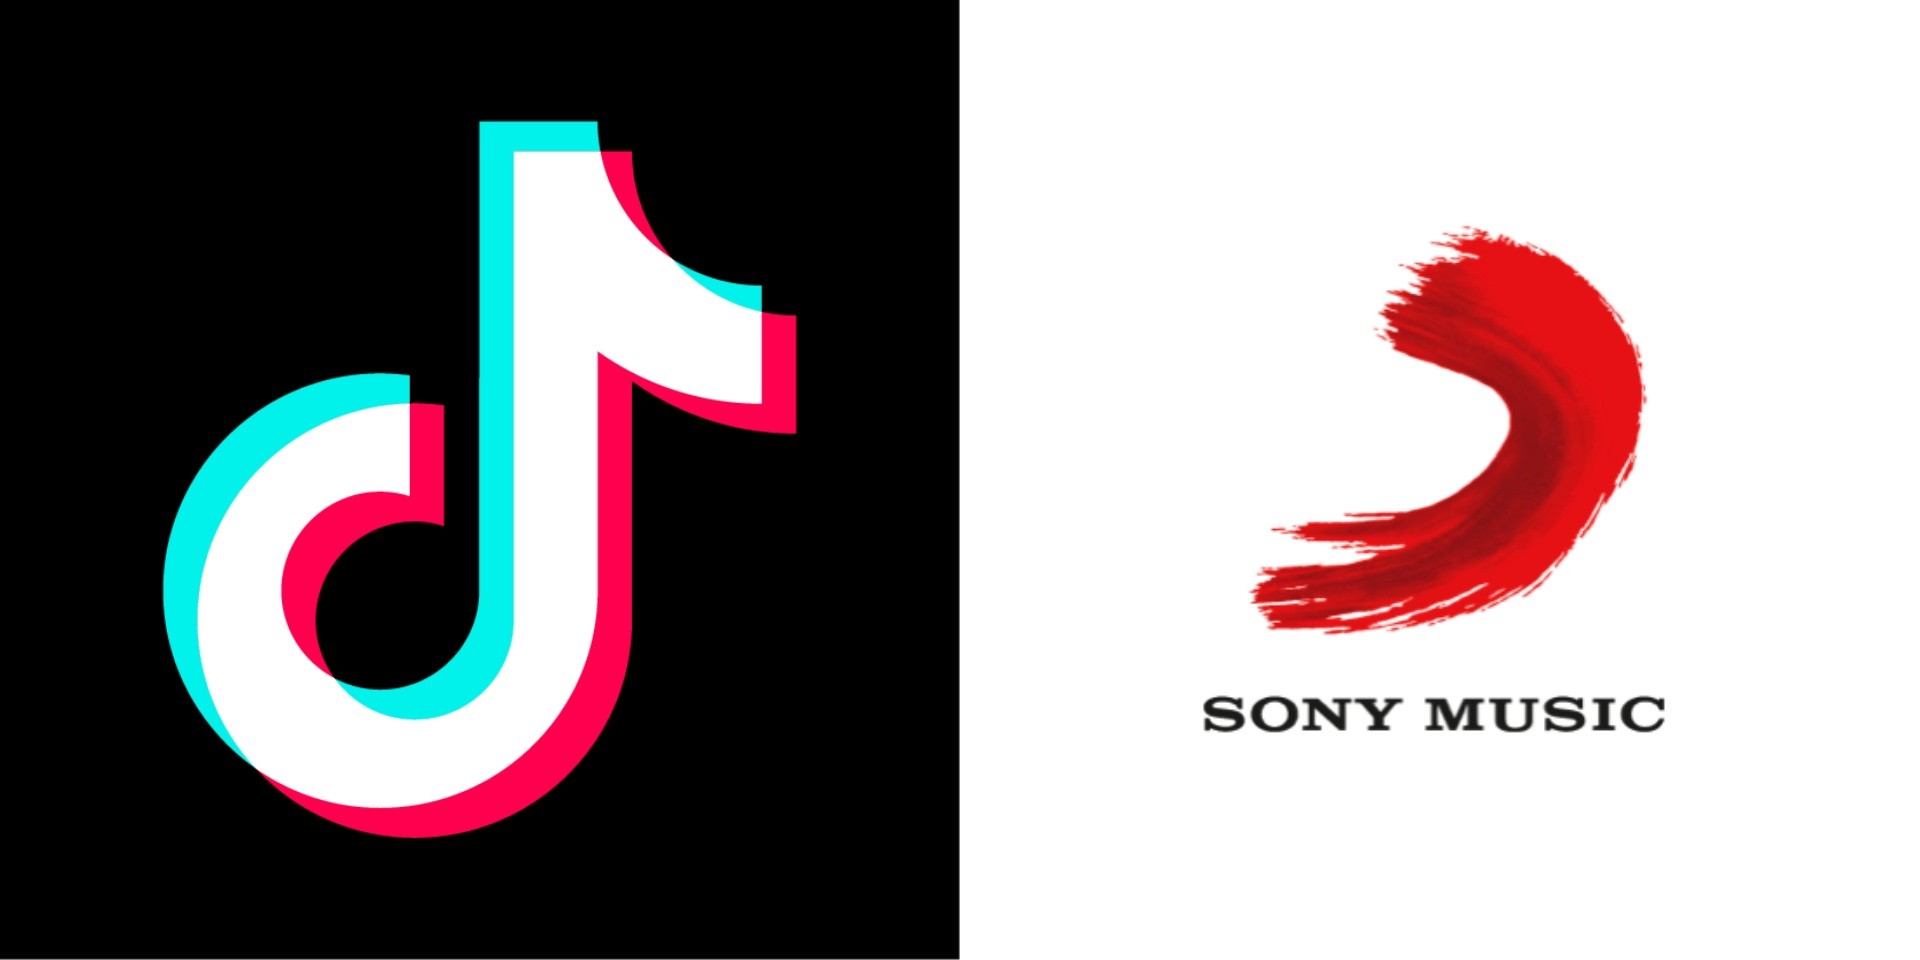 TikTok announces new deal with Sony Music Entertainment to give users access to more music